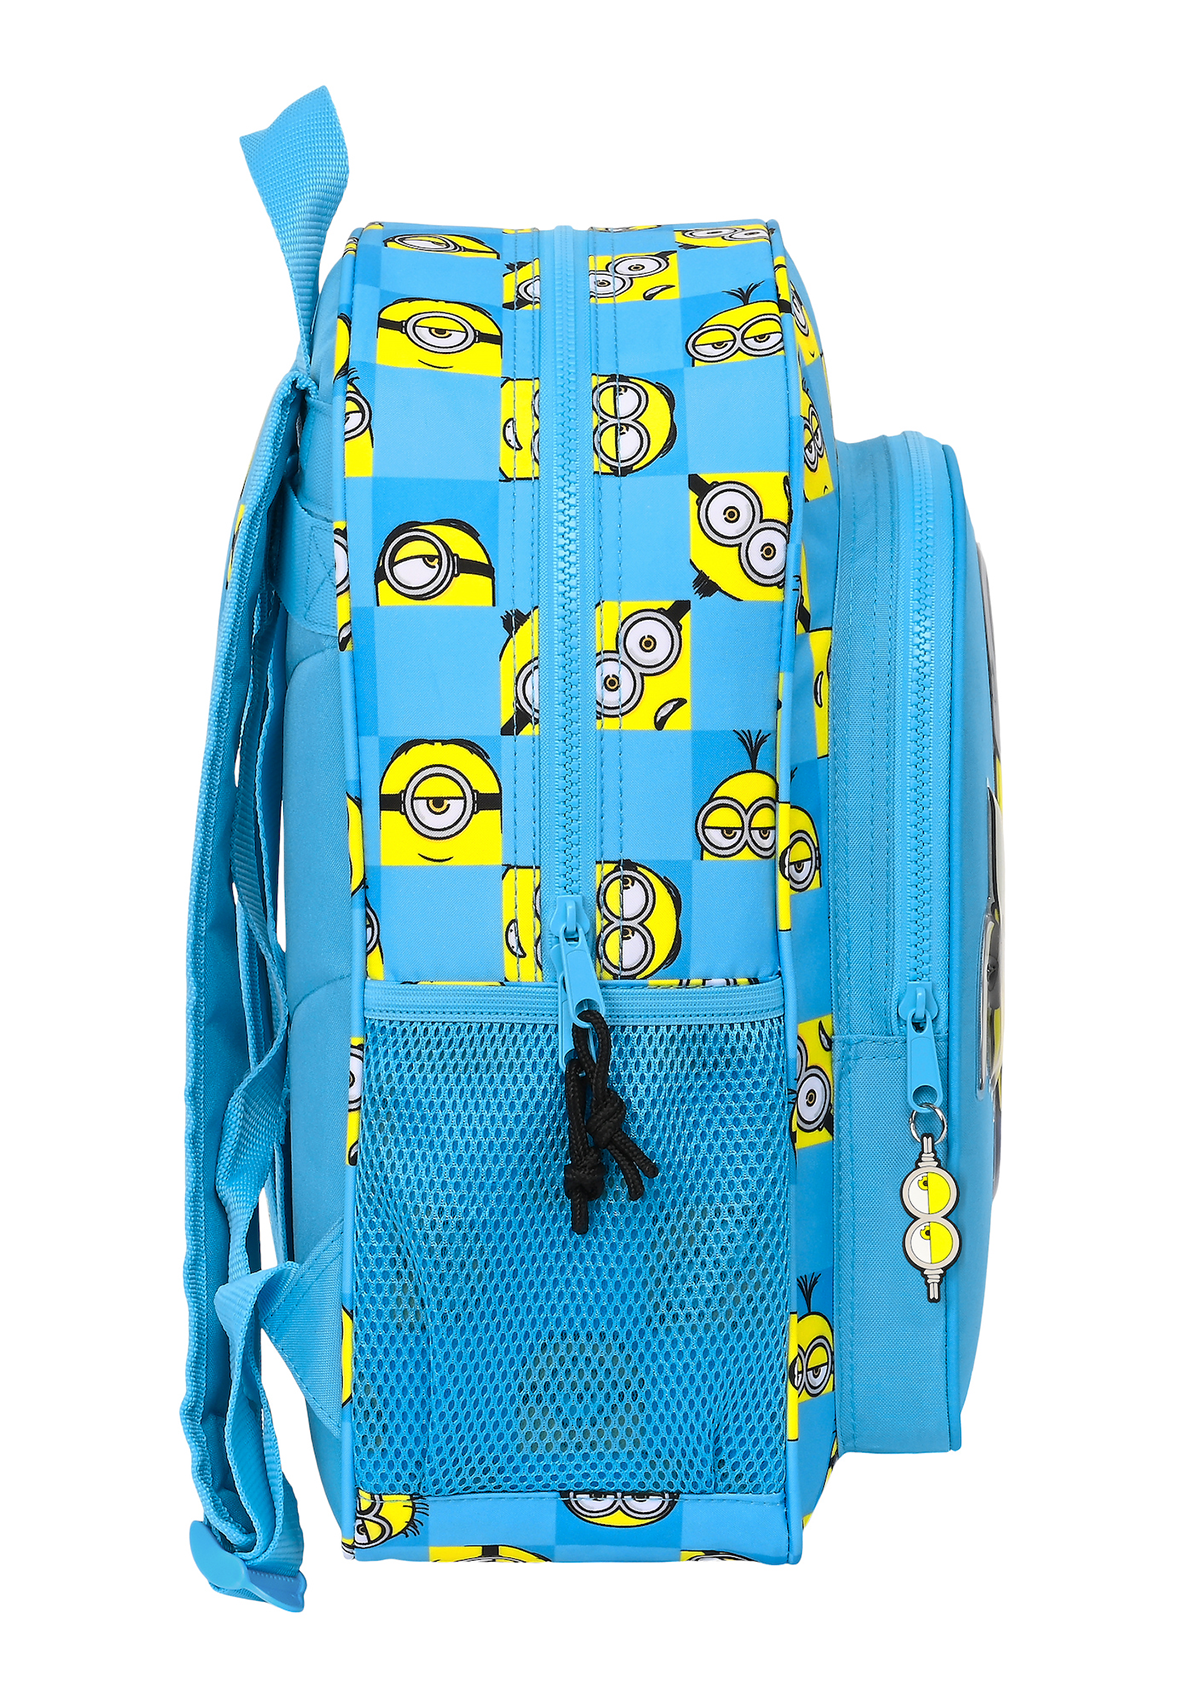 Minions Junior Backpack